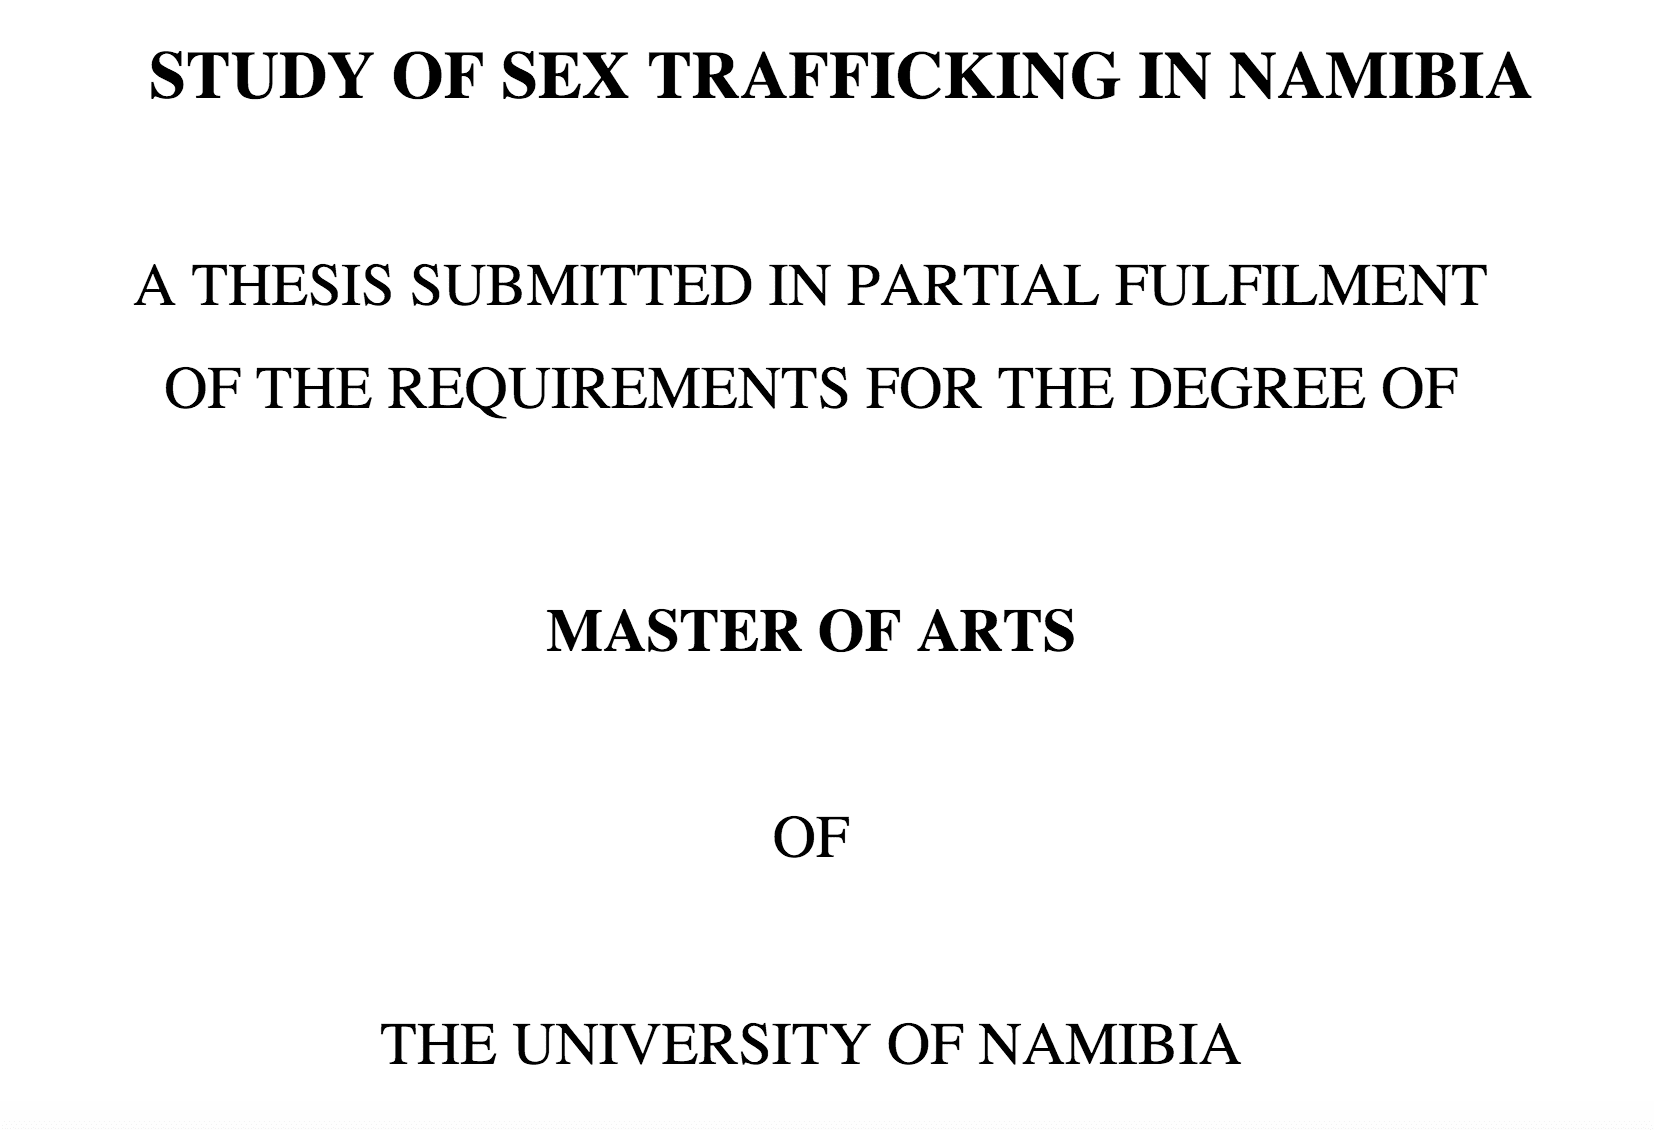 Study of sex trafficking in Namibia